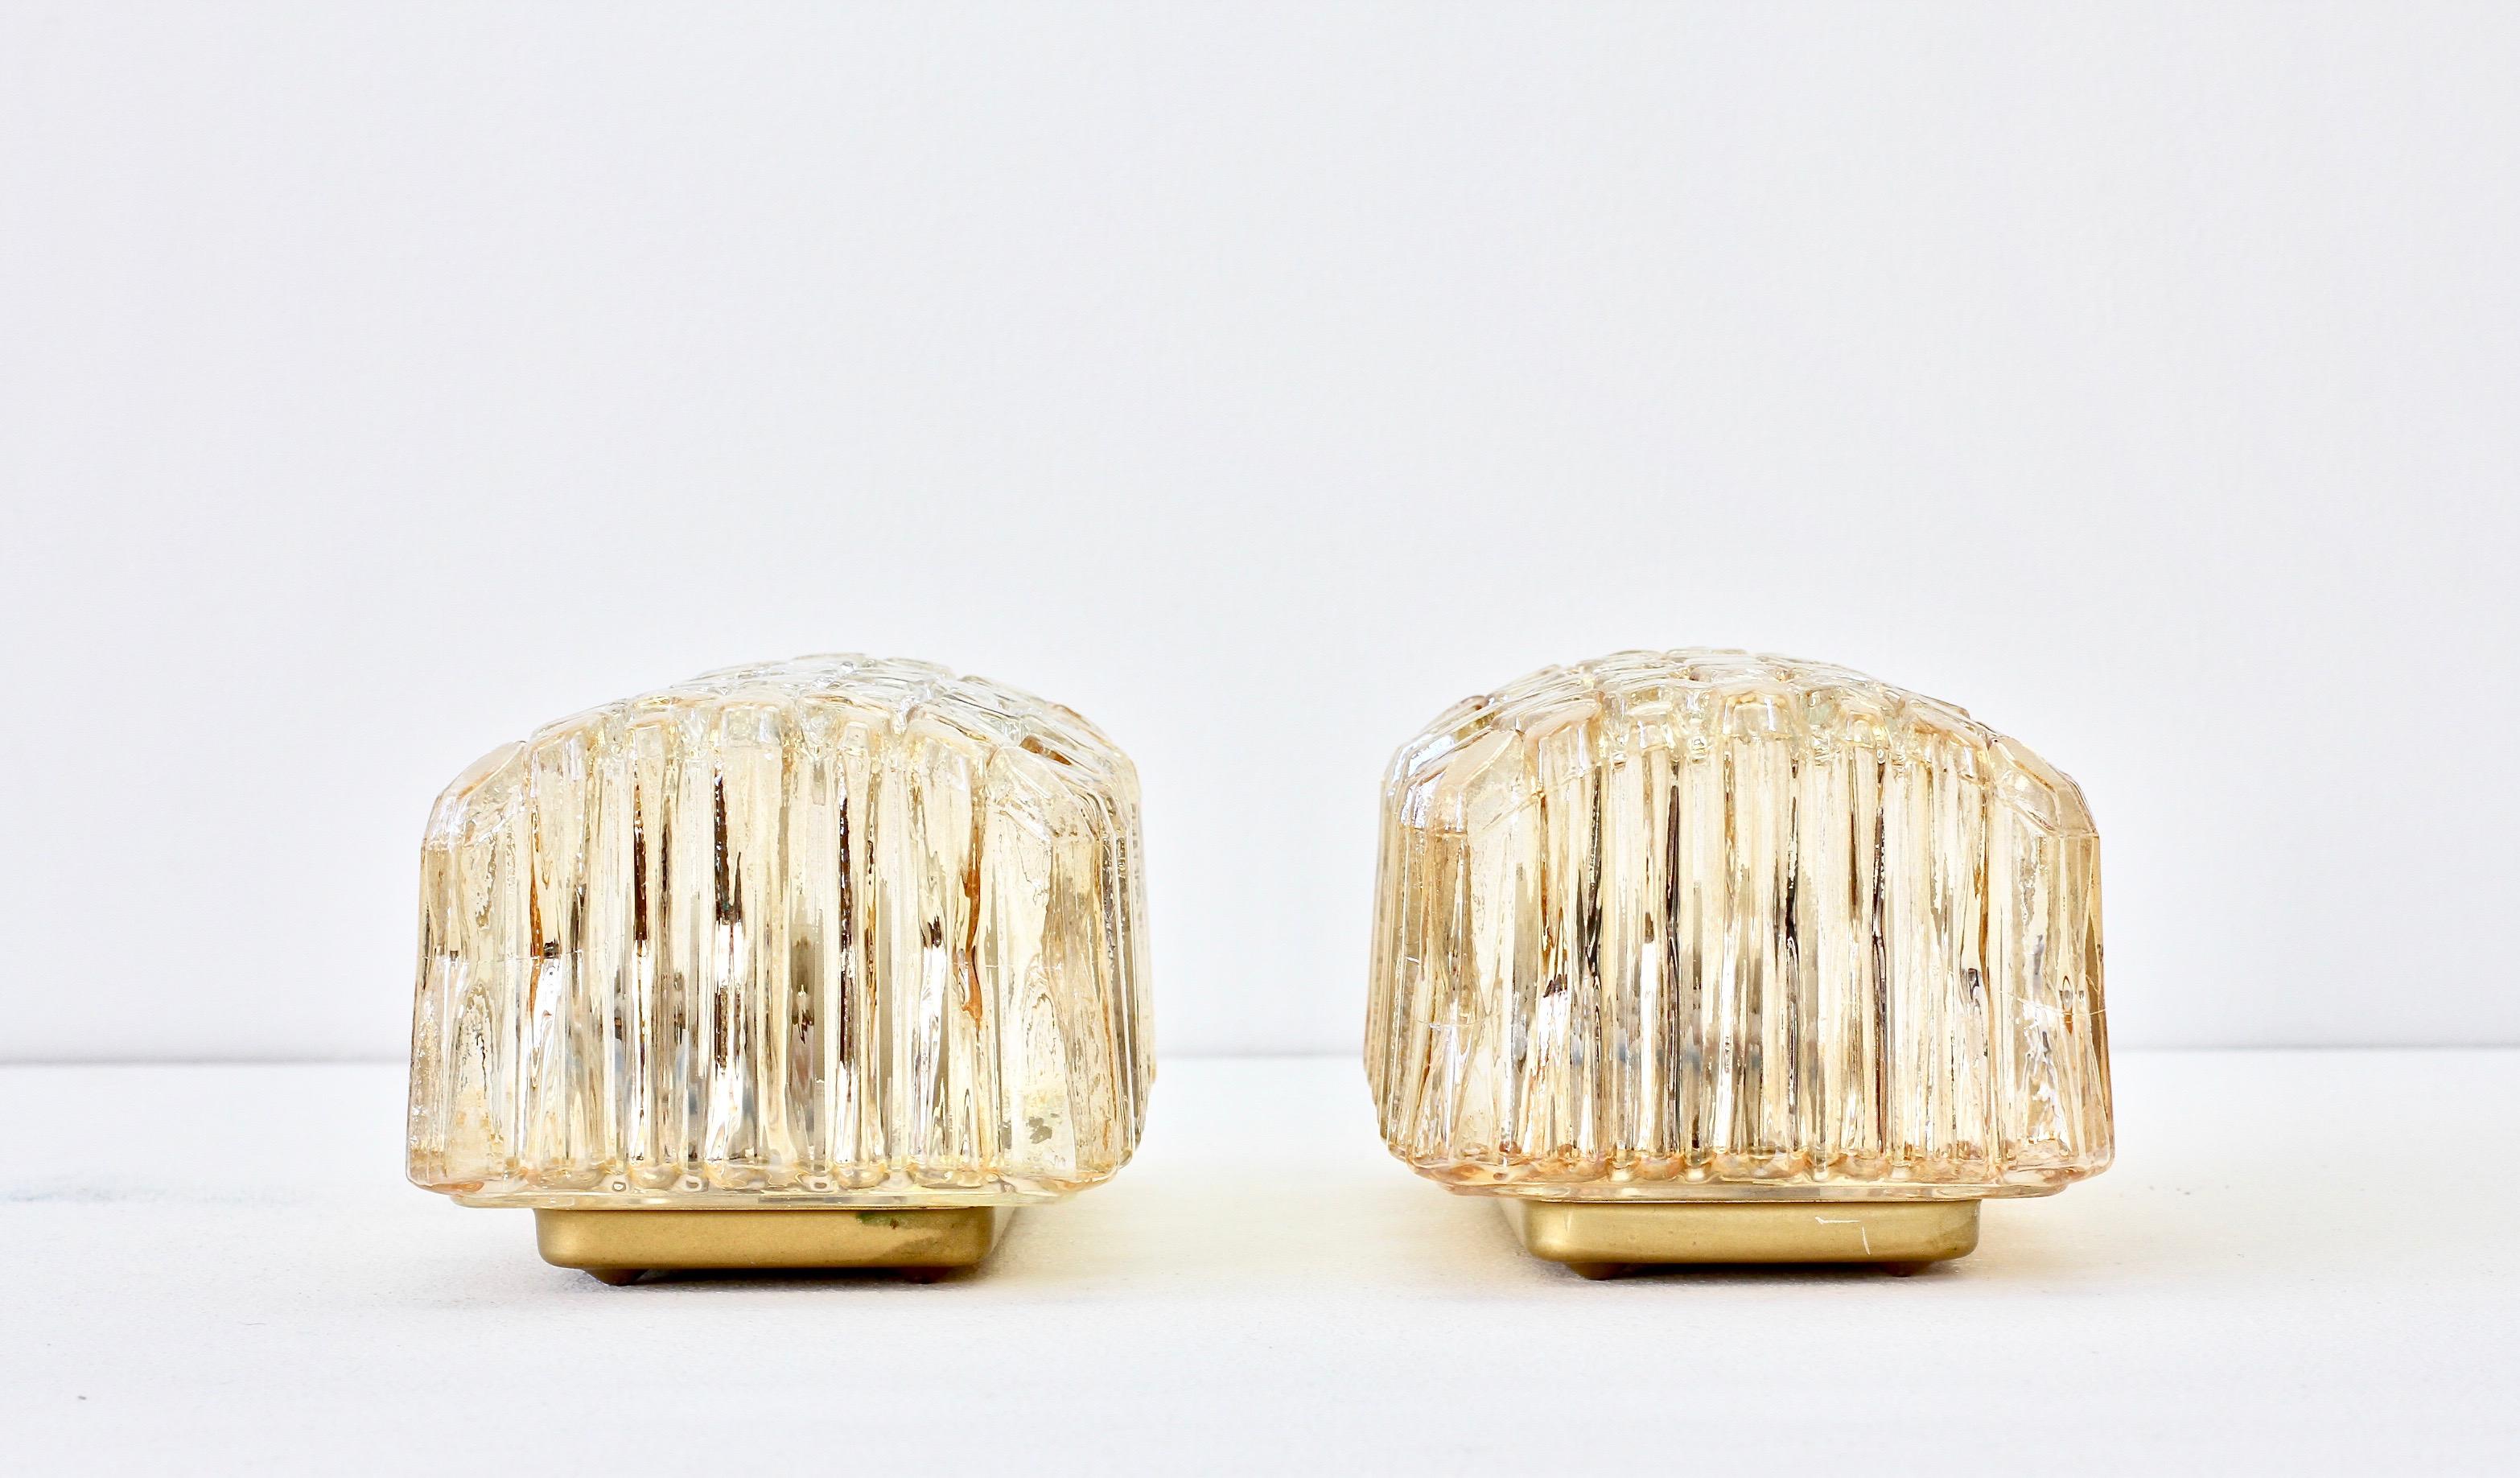 Limburg Pair of Wall Lights 1970s Organic Textured Amber Toned Ice Glass Sconces 2